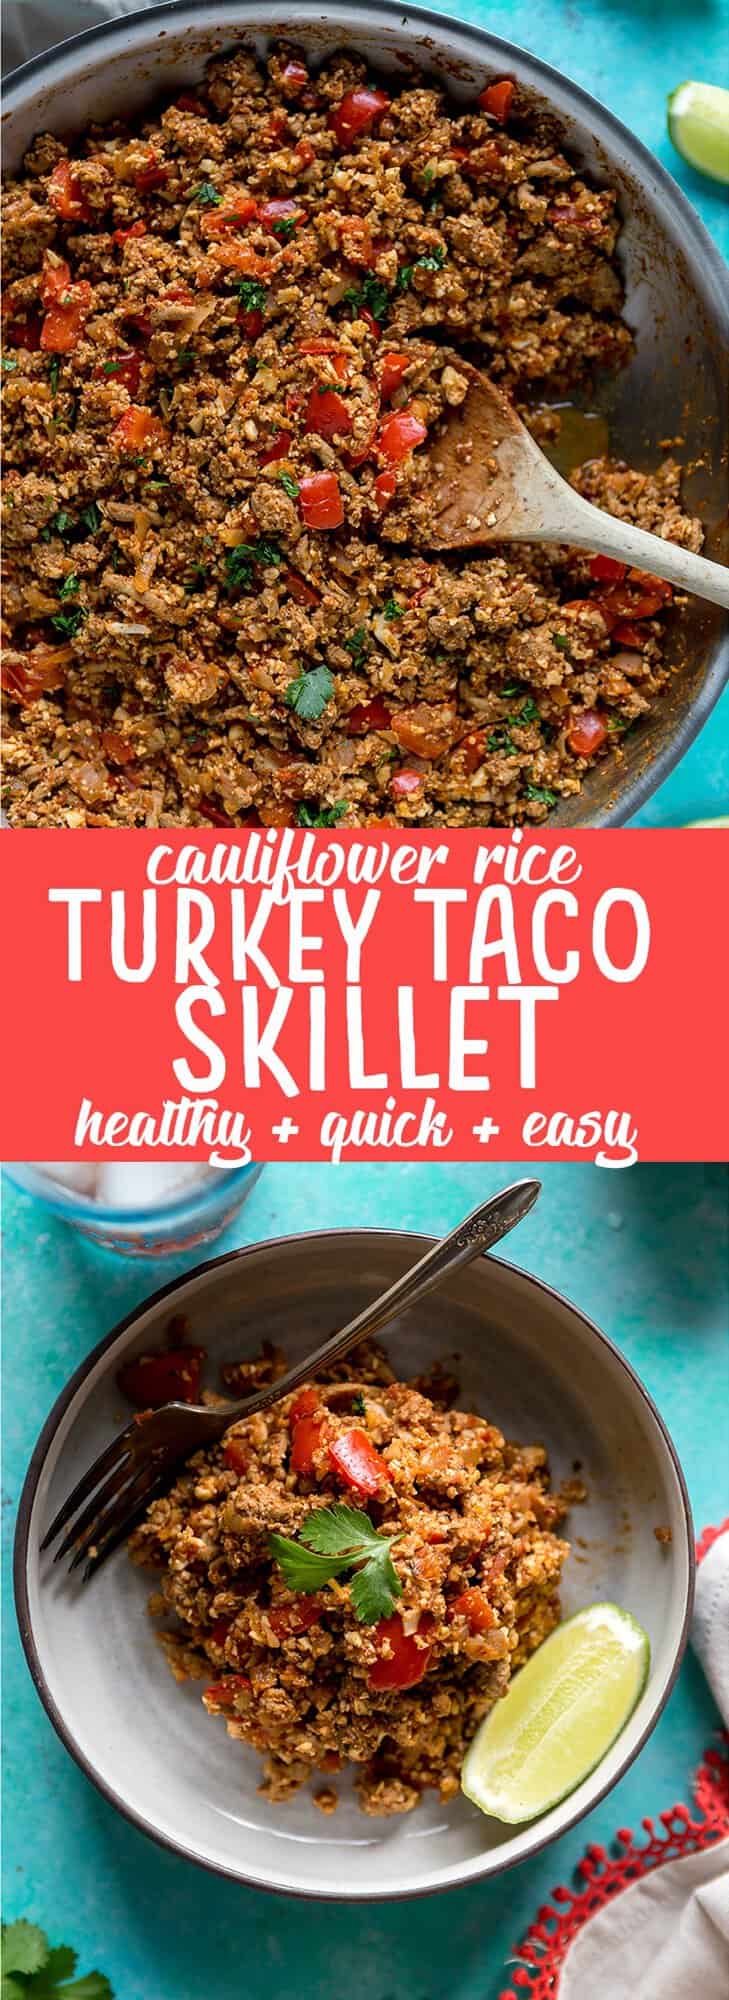 This Healthy Cauliflower Rice Turkey Taco Skillet is a quick and healthy low carb dinner. An easy way to sneak in extra veggies but packed with flavor! | Mexican cauliflower rice recipe | Healthy dinner recipe | Low carb cauliflower rice recipe | Easy cauliflower rice dinner recipe | Quick dinner recipe | Quick and healthy dinner ideas | One pot | paleo | whole 30 | ground turkey recipe | low calorie dinner recipe